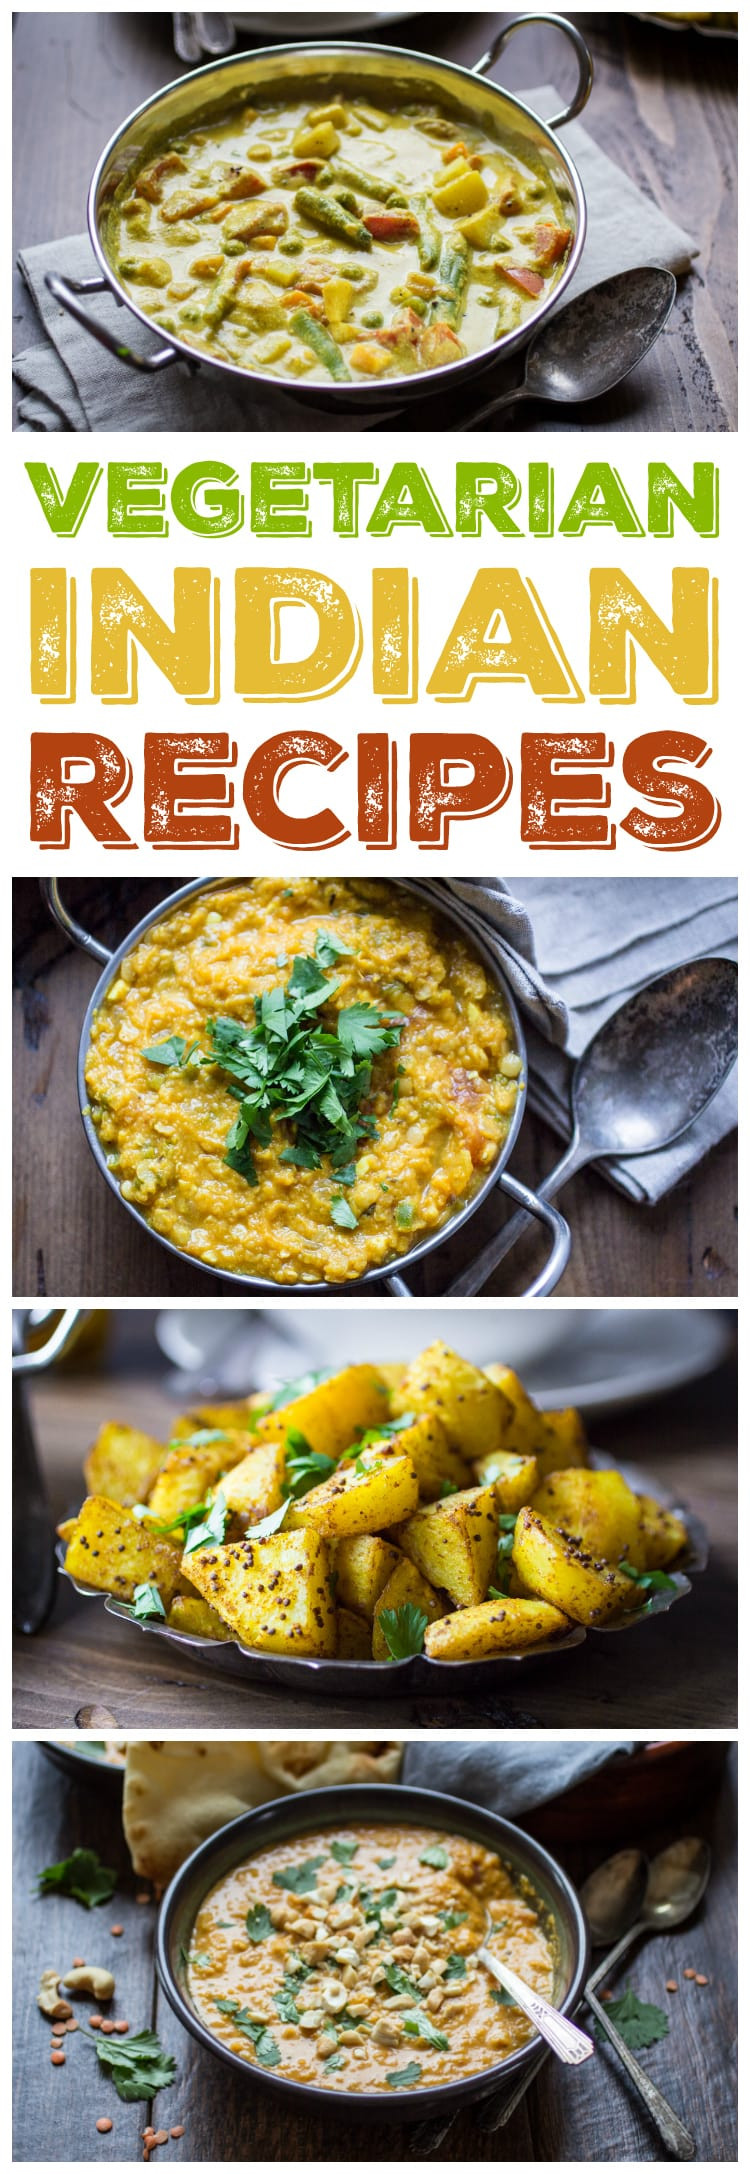 Veg Recipes Indian
 10 Ve arian Indian Recipes to Make Again and Again The